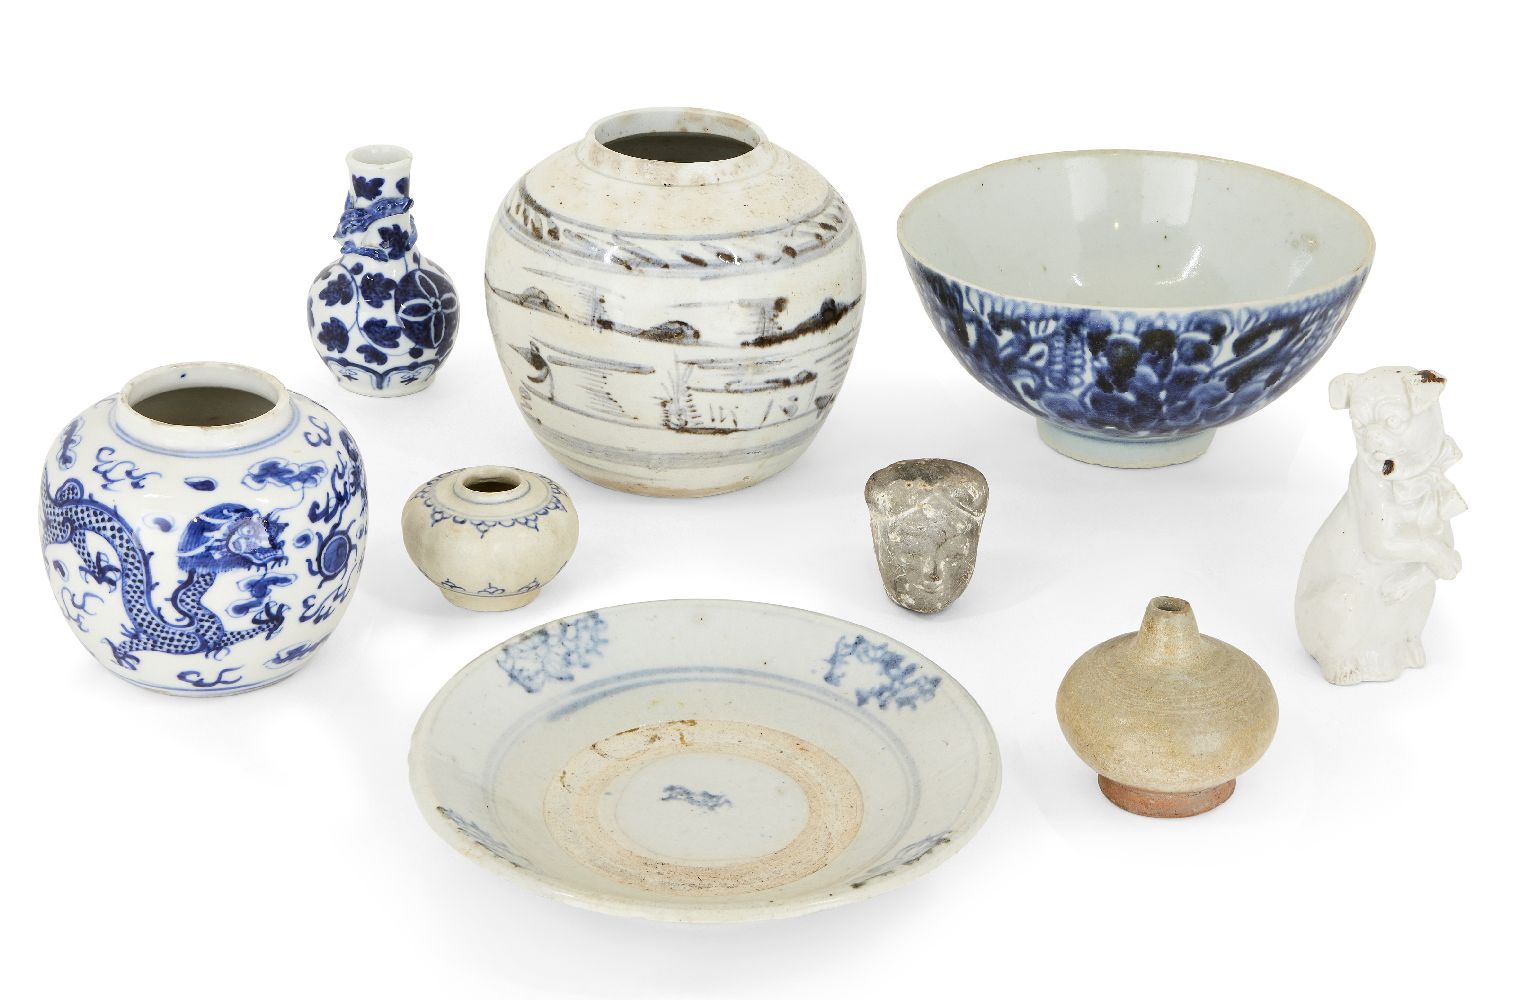 A collection of Chinese and Annamese ceramics, 15th - 19th century, comprising a lobed jarlet, 6cm